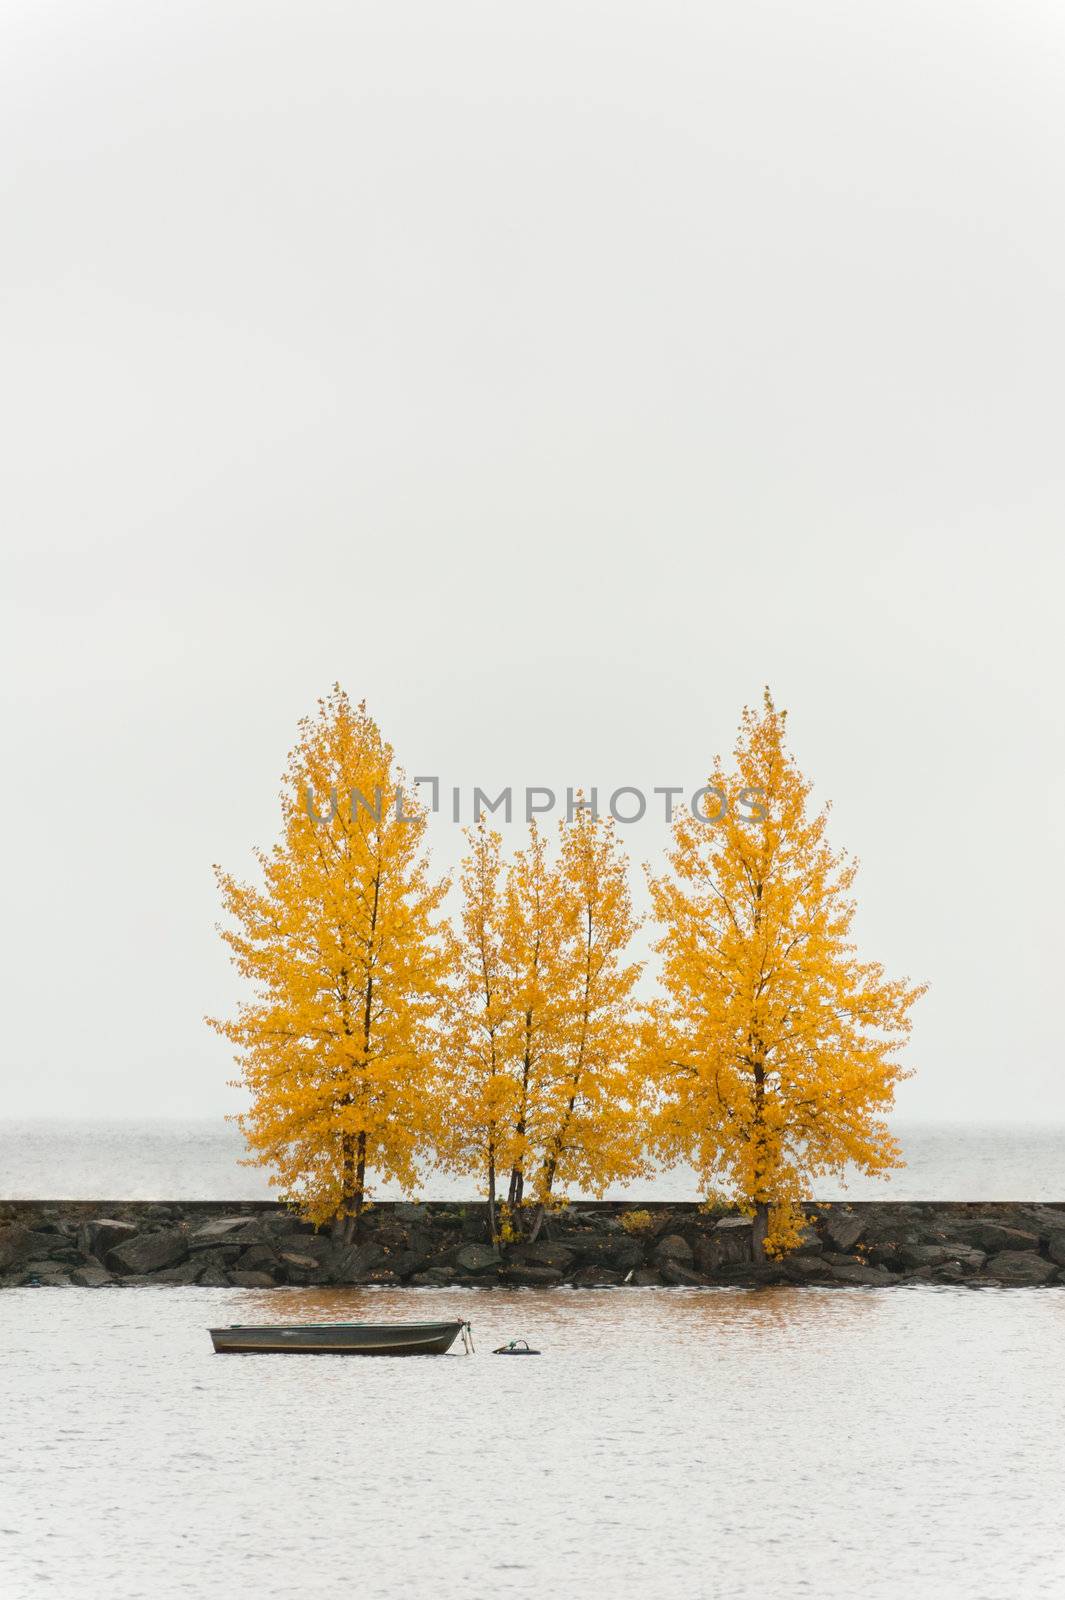 Trees in autumn color on a harbor quay by 3523Studio